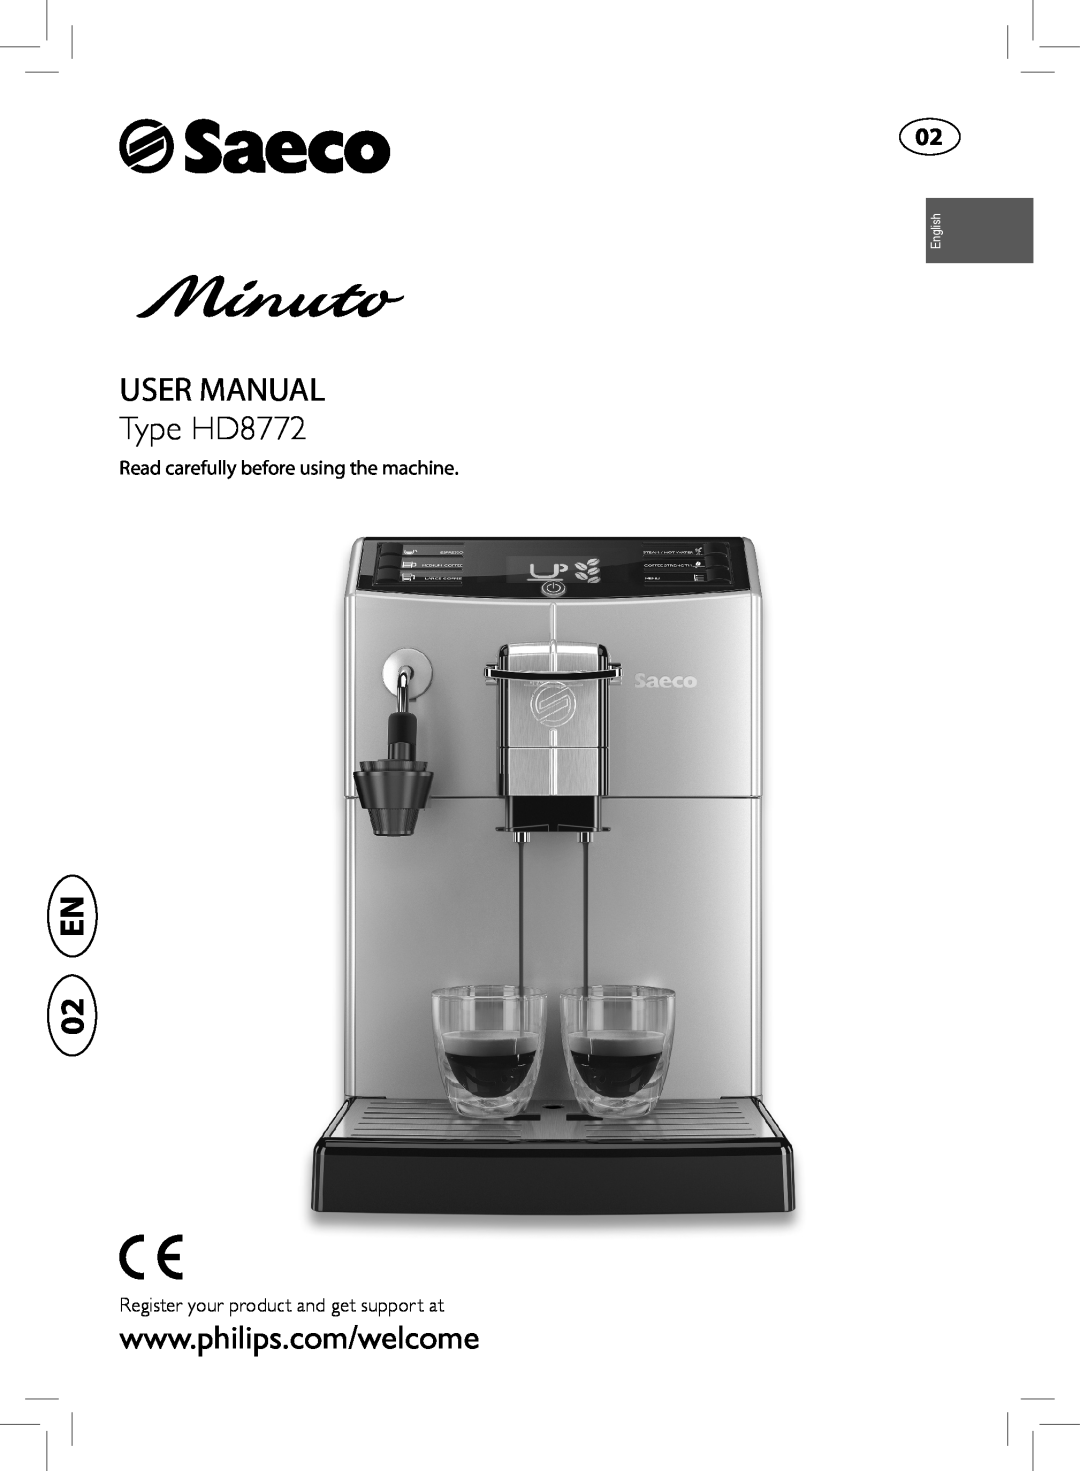 Saeco Coffee Makers HD8772 user manual 02 EN, Read carefully before using the machine, English 